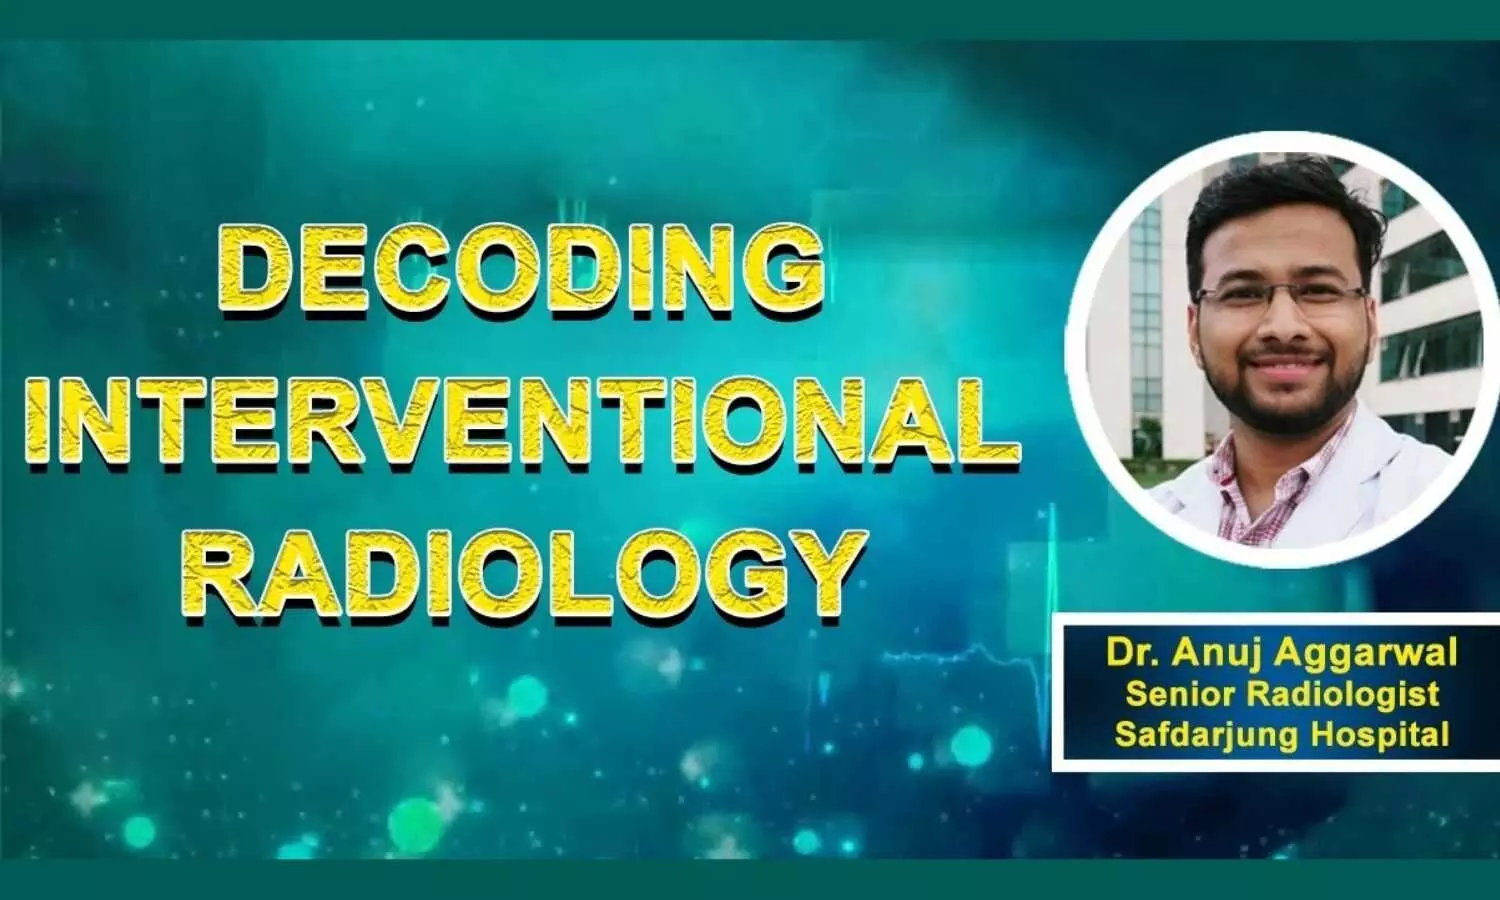 Decoding Interventional Radiology with -Dr. Anuj Aggarwal